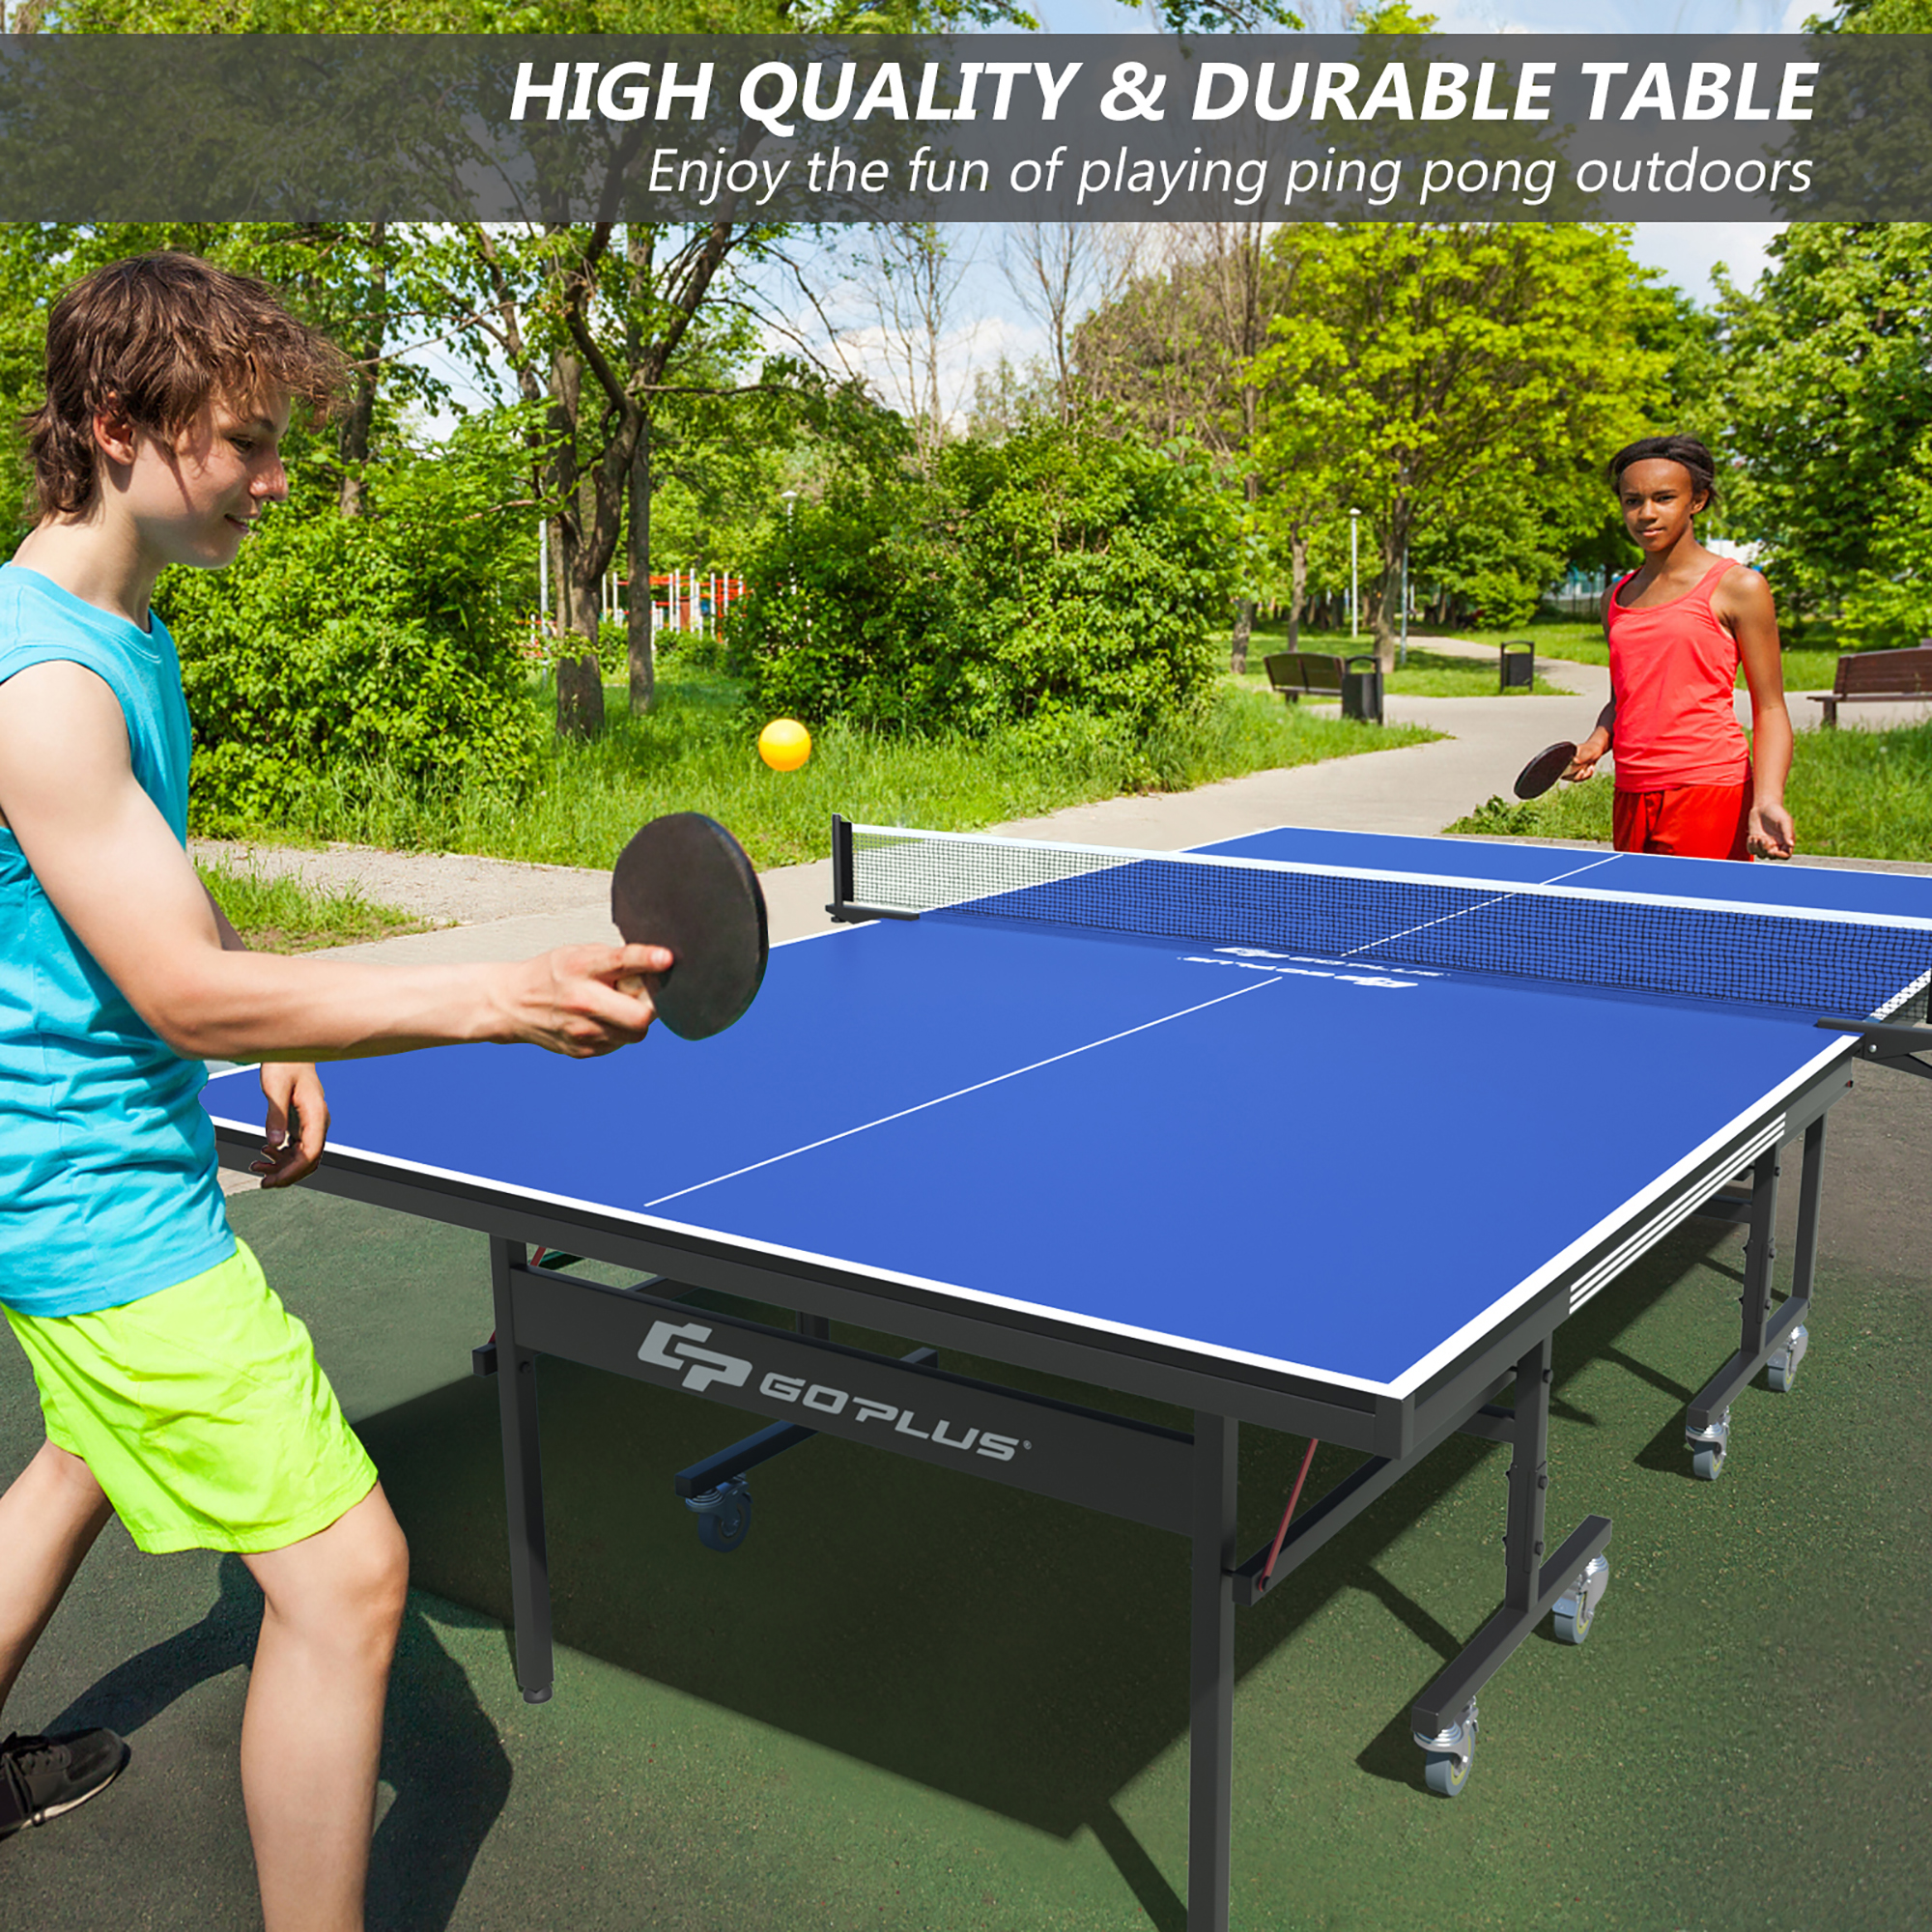 Costway Goplus Foldable Professional Table Tennis Table for Indoor/Outdoor Playing